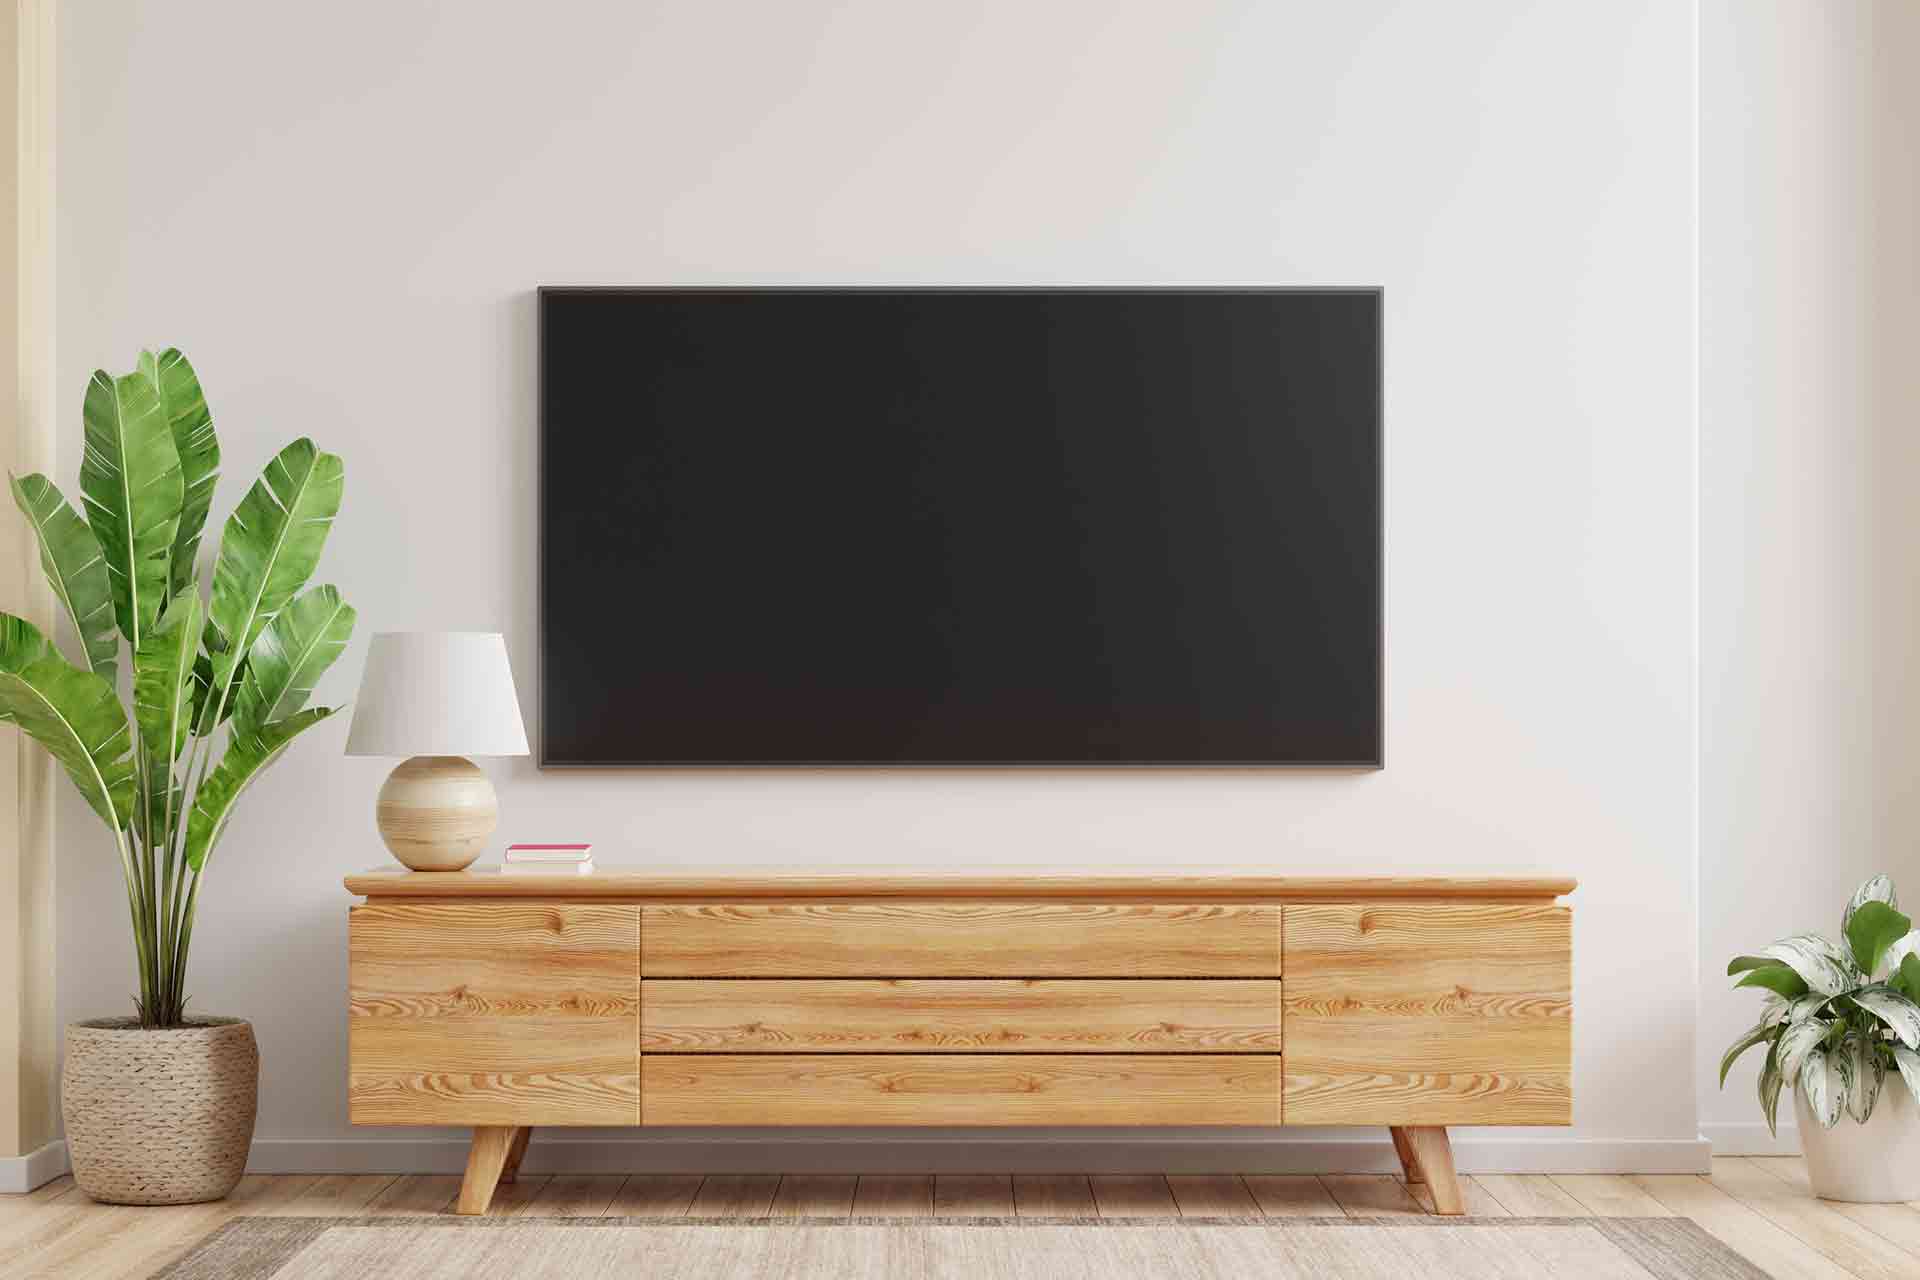 https://www.checkatrade.com/blog/wp-content/uploads/2021/08/Feature-How-to-mount-a-your-tv-to-the-wall.jpg